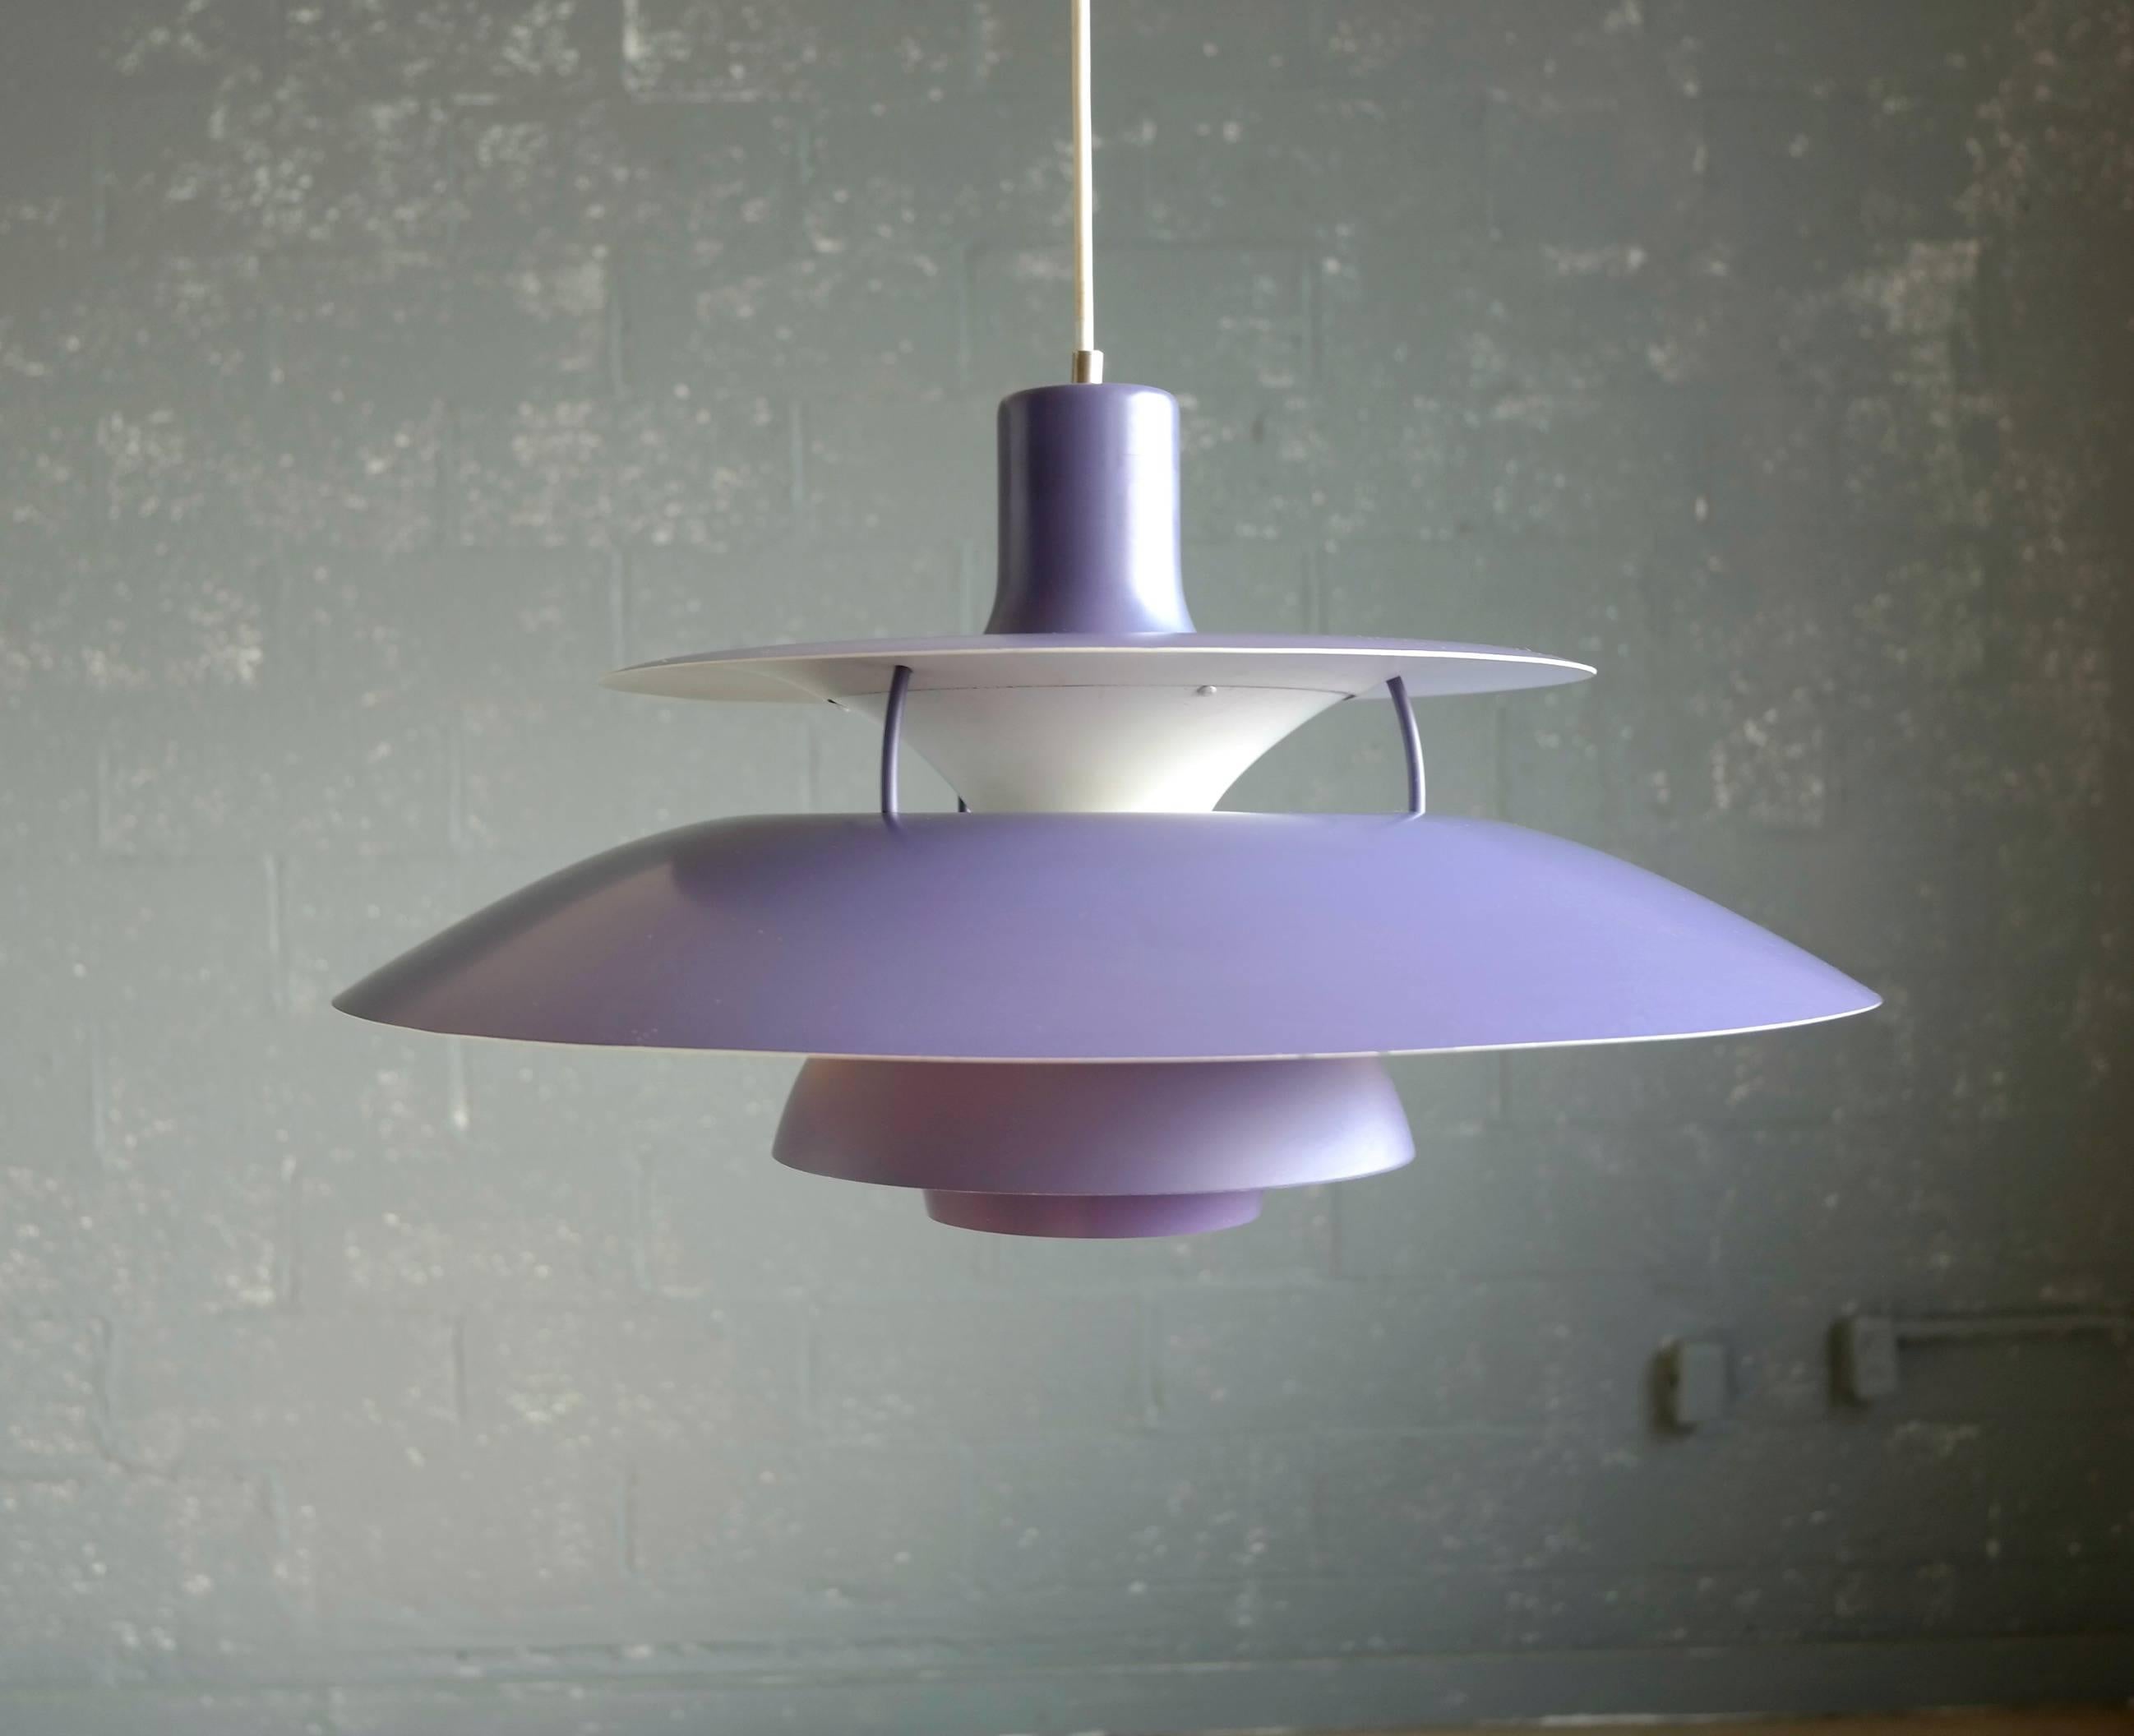 This iconic PH-5 pendant lights in aluminium by Poul Henningsen for Louis Poulsen originally launched in 1966. This is in a very vibrant limited edition purple incarnation made, circa 1980 with interior cone and reflector in silver working in tandem